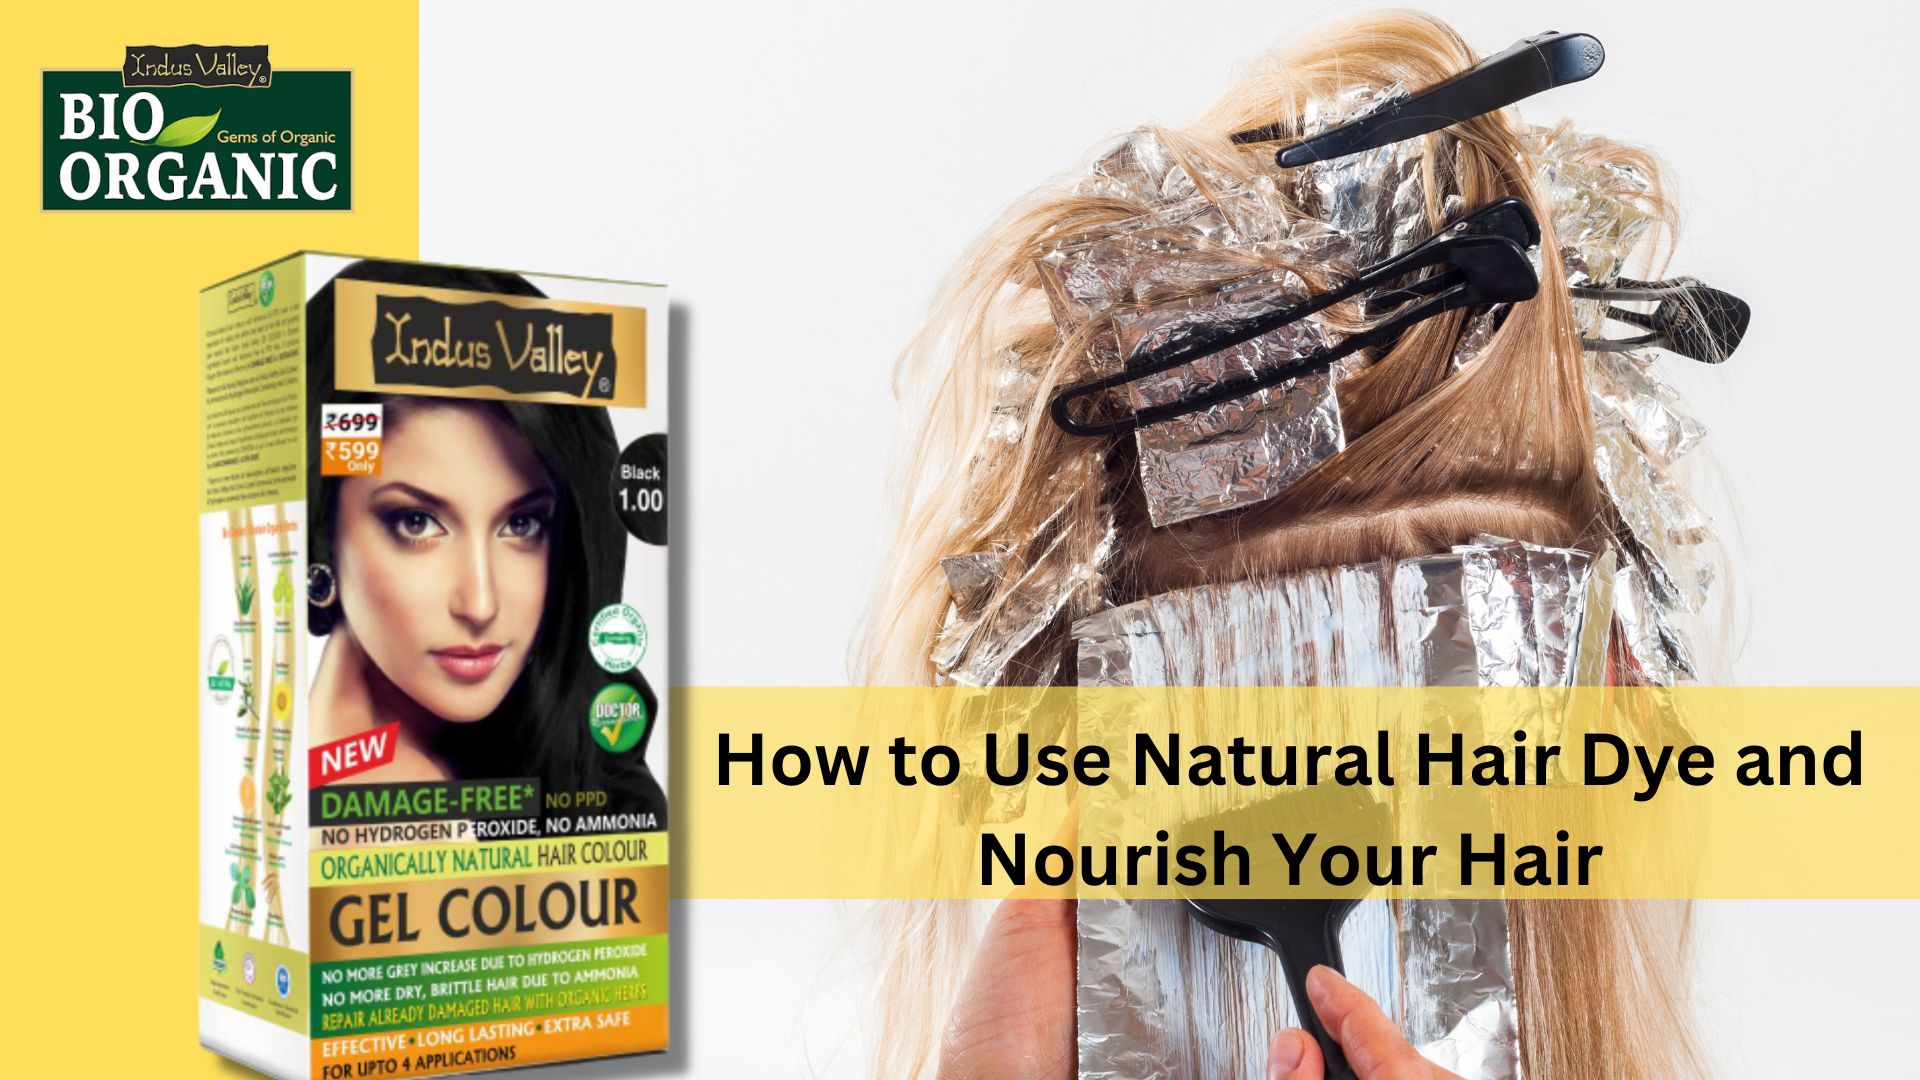 How to Use Natural Hair Dye and Nourish Your Hair